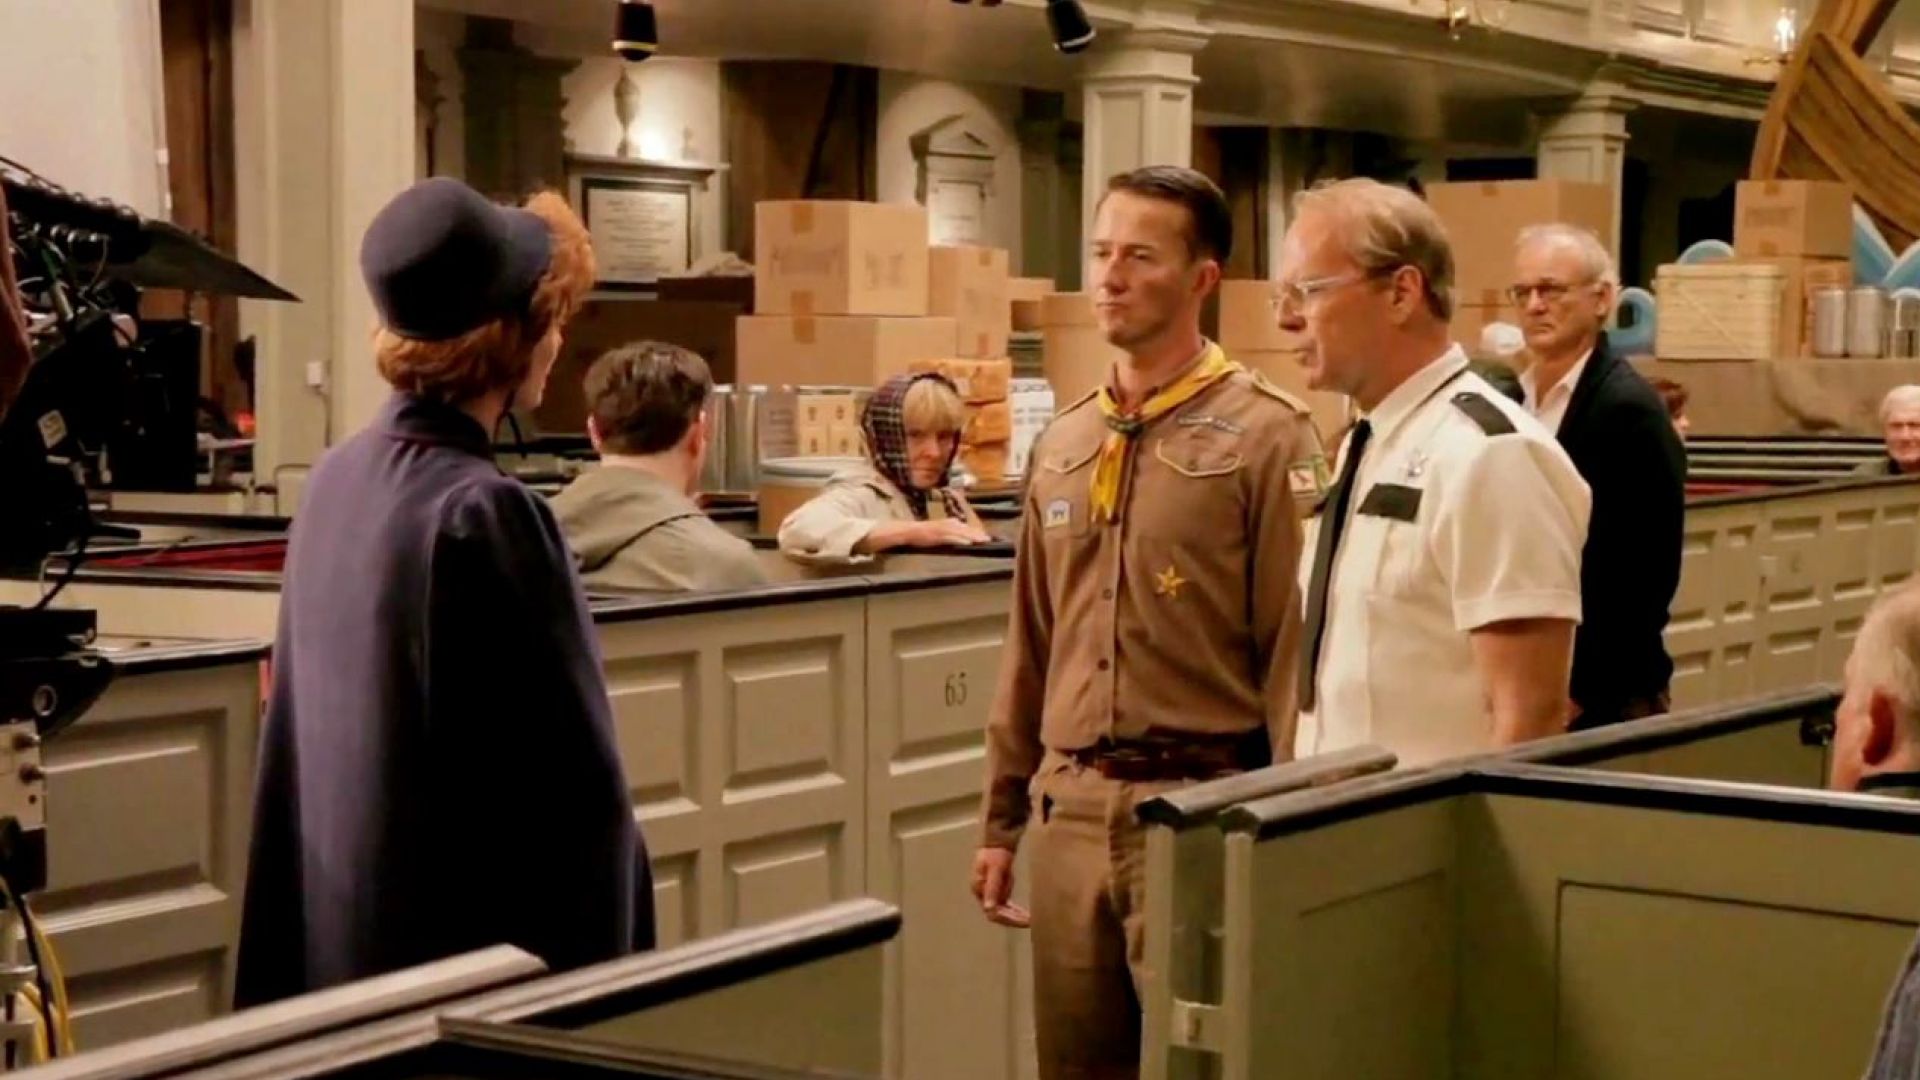 Edward Norton proves himself to be a real friend to Khaki scouts everywhere in Moonrise Kingdom